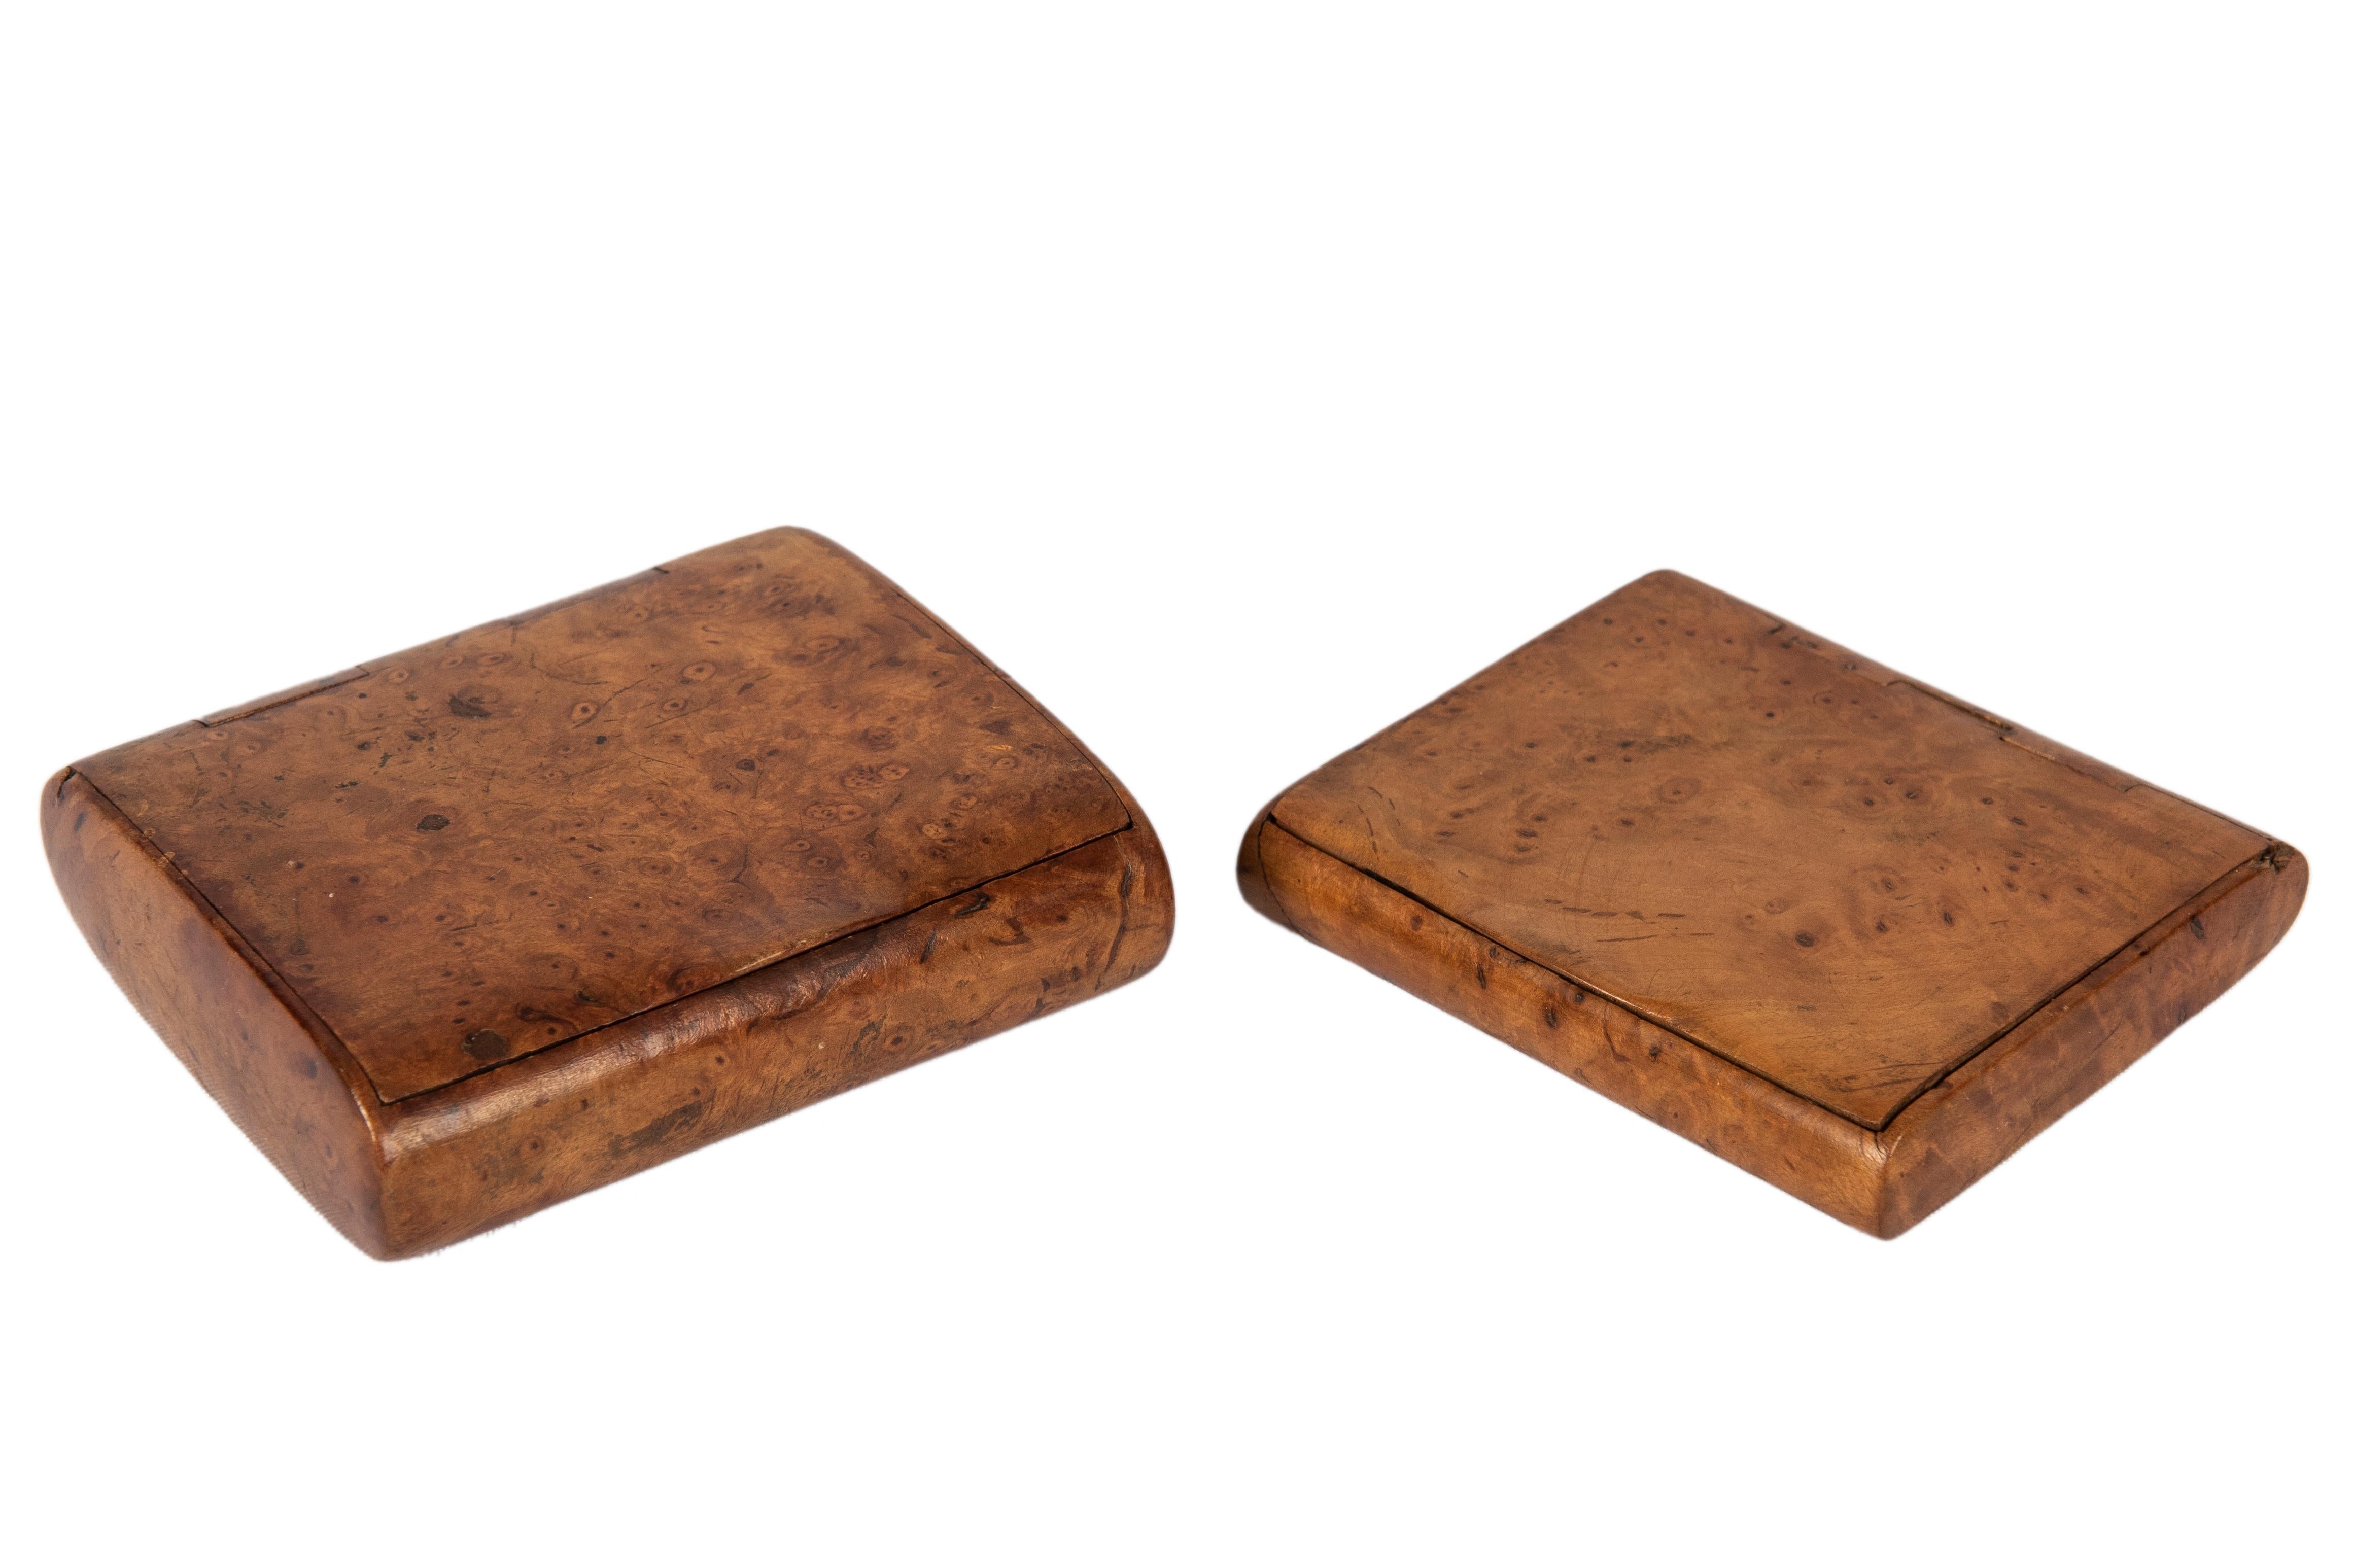 Birchwood Russian cigarette cases, his and hers from the Romanov era, each of burled wood and oval section, hinged with thumbpiece, lightweight mementos of the tsarist era, easy to carry or slip in pocket and purse. 

3 ¼ x 3 5/8 x ¾ in. (8.3 x 9.2